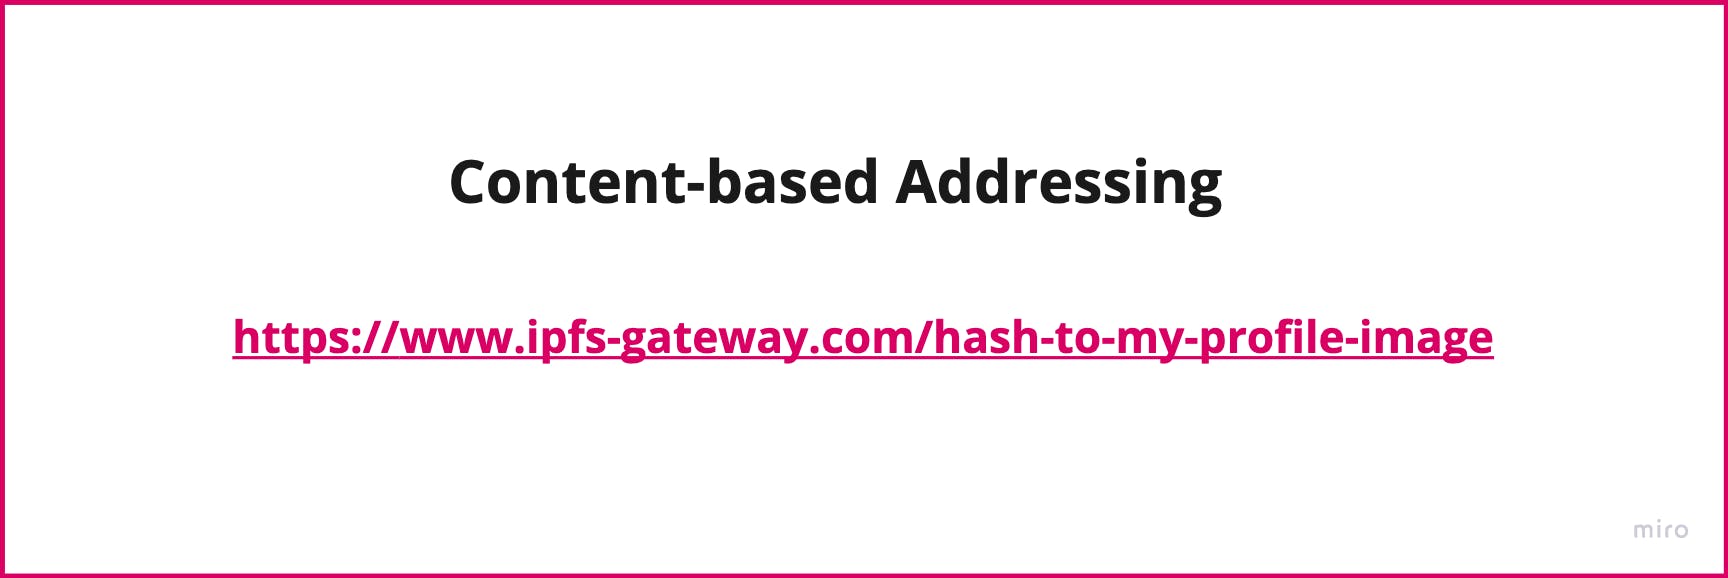 Example of accessing content with their IPFS hash on the web using Content-Based Addressing